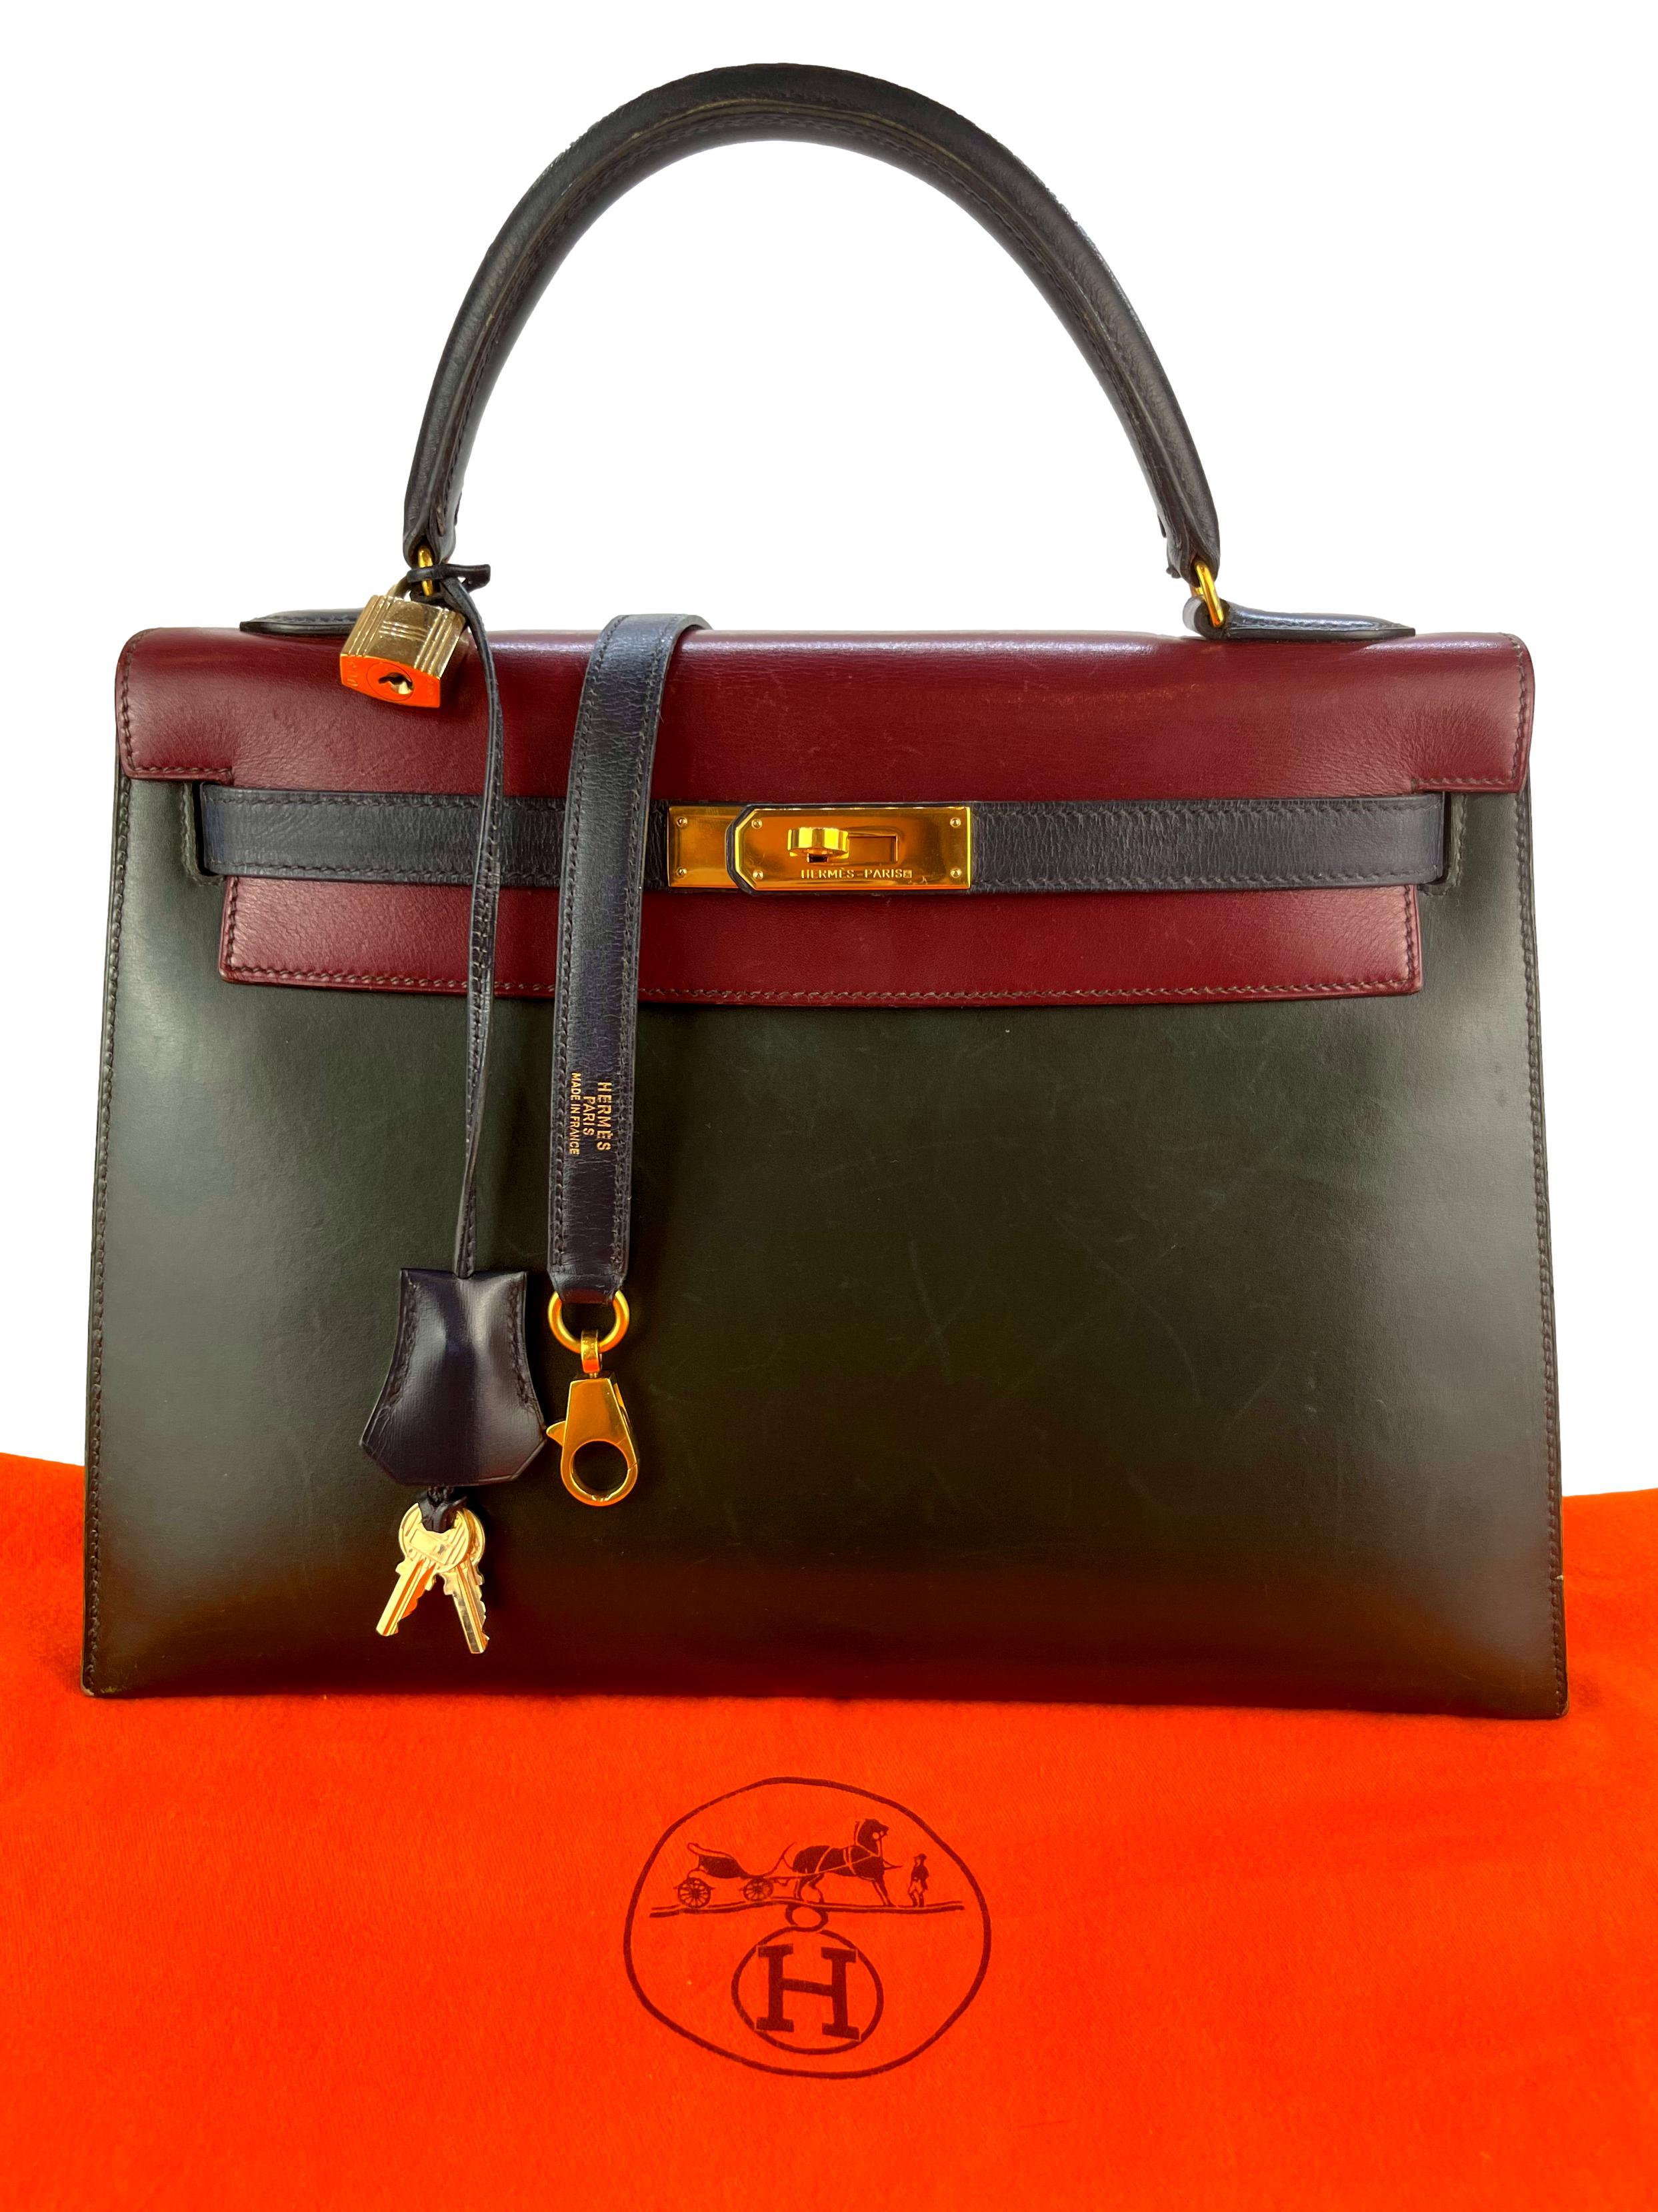 Hermès Limited Edition Vintage Tri-Color Vert Fonce, Rouge H & Indigo Box Calf Kelly Handbag with Gold Hardware 32, 1991. Originally introduced in the early 1930's as the Sac à dépêches bag, the Kelly became world renowned after Grace Kelly,